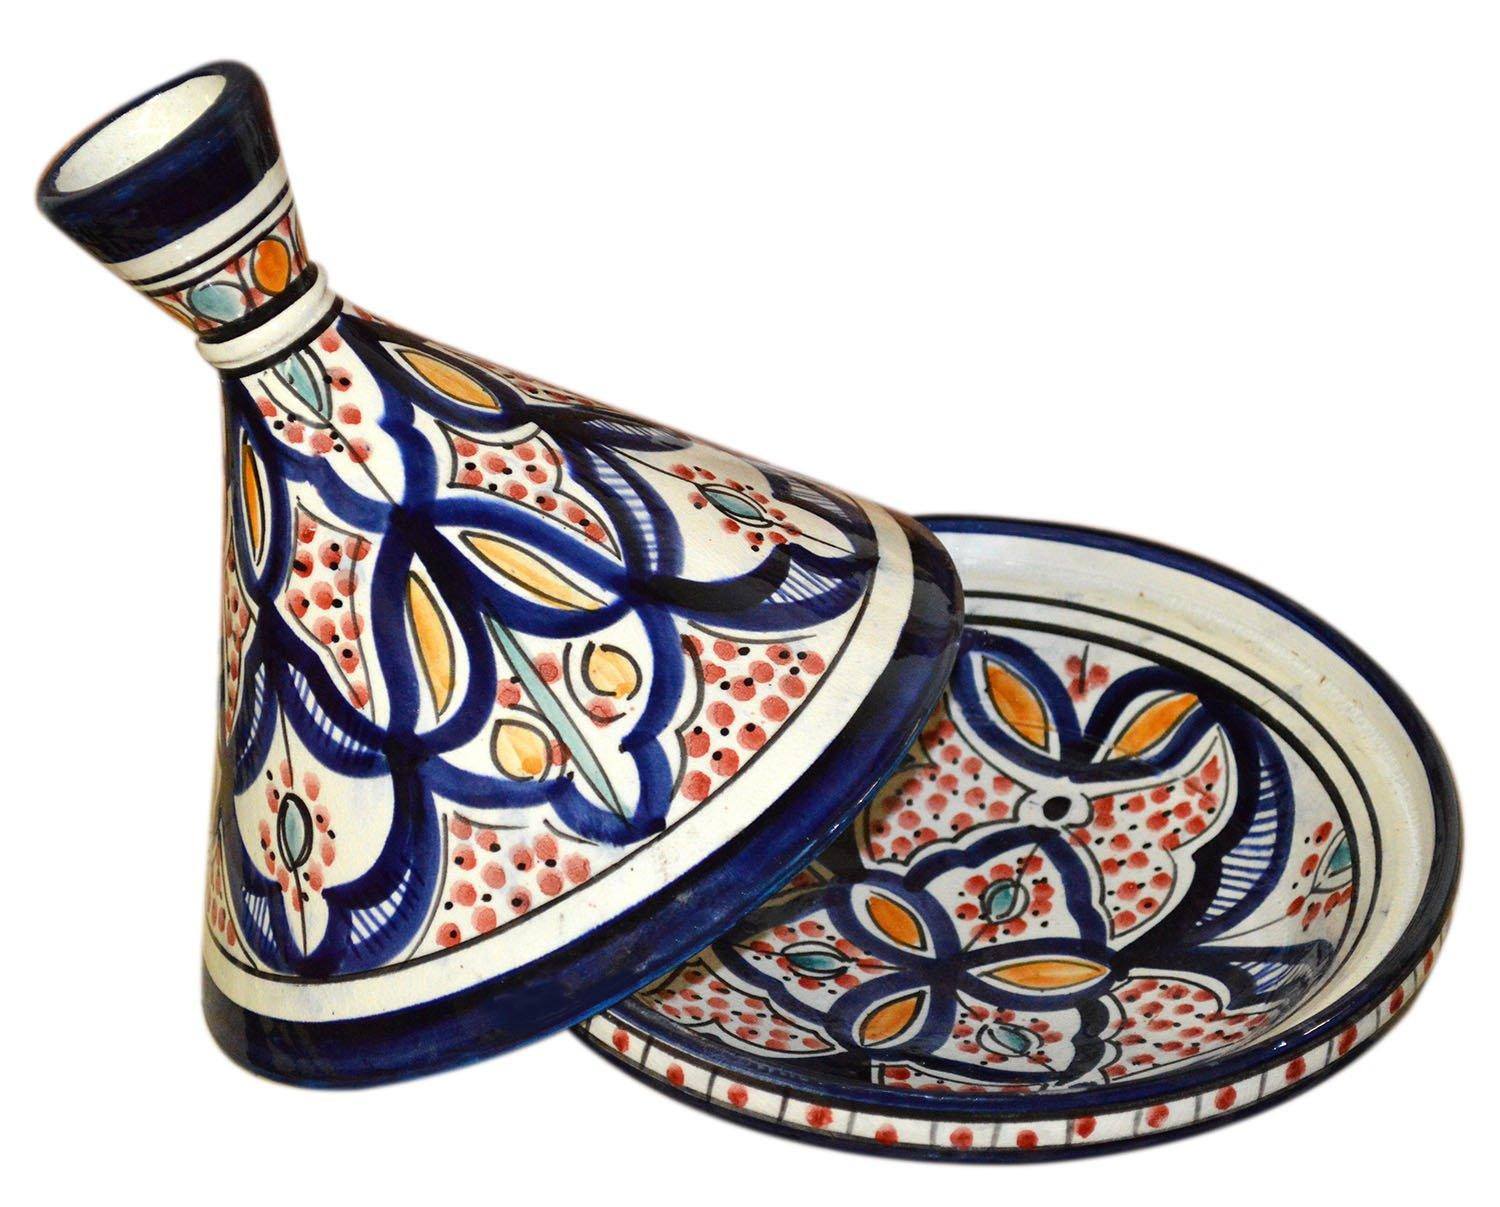 Moroccan Handmade Serving Tagine Ceramic With Vivid colors Original 8 inches Across White & Blue - CookCave